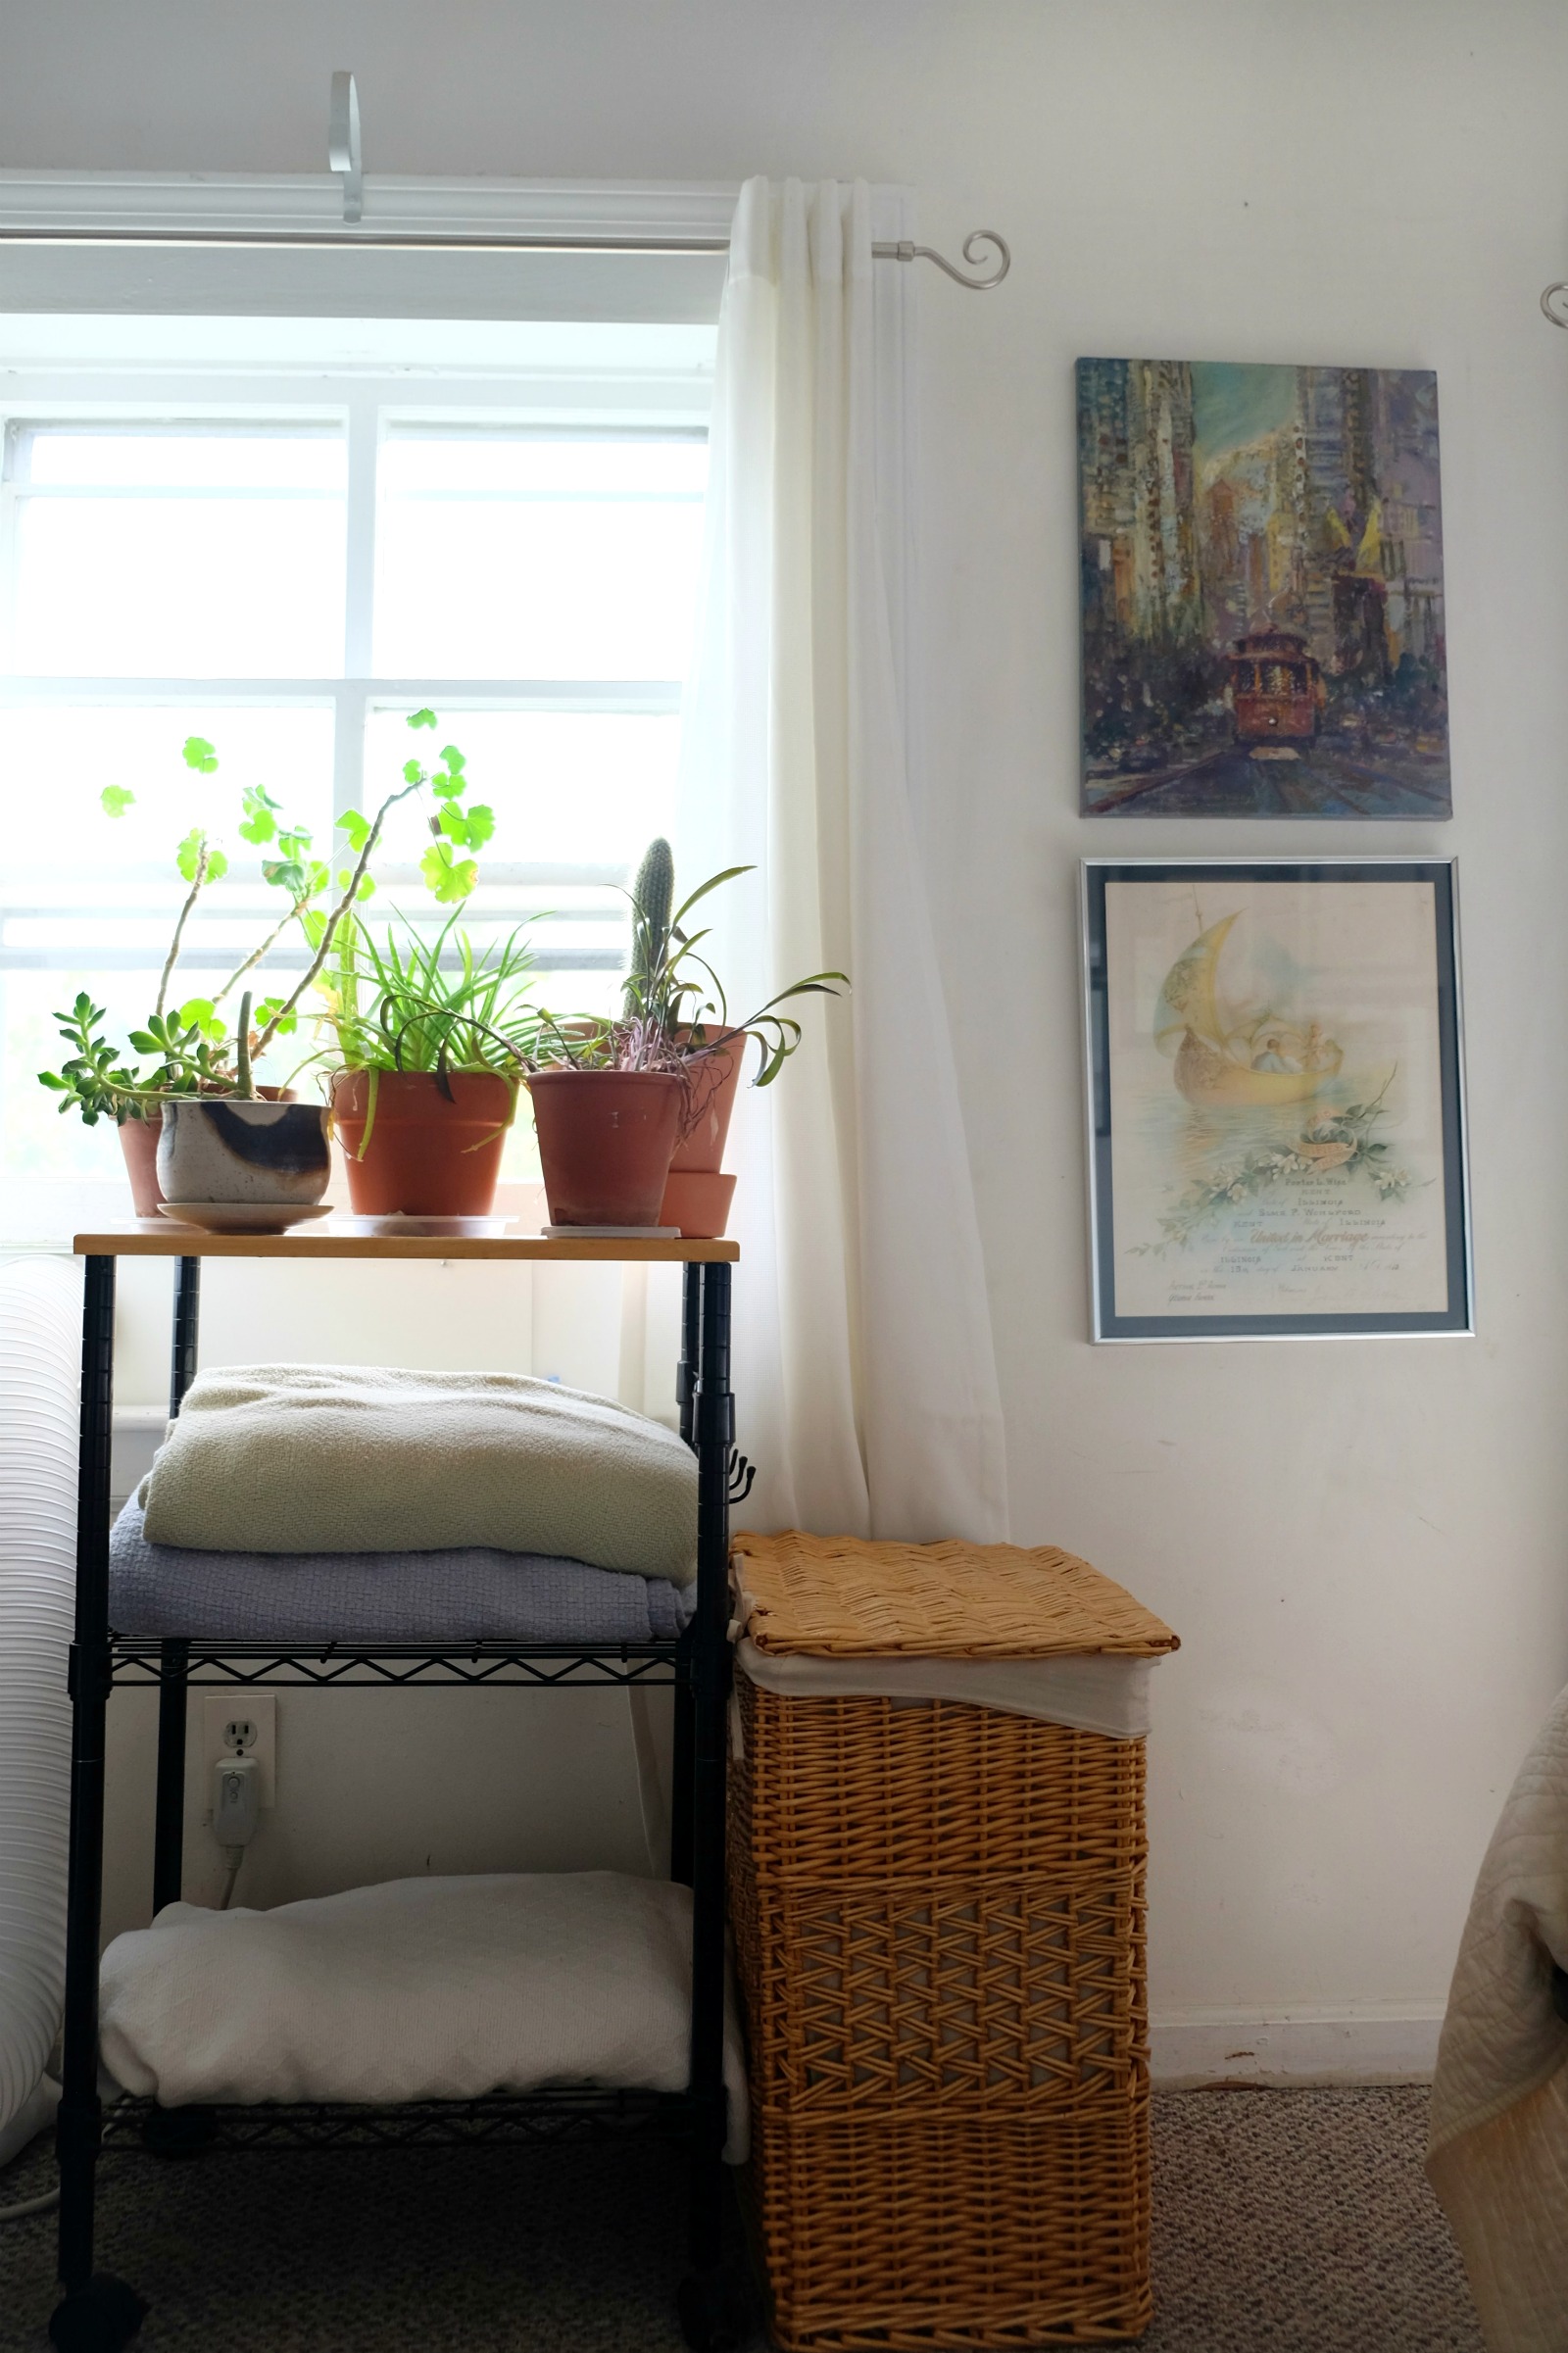 image shows potted plants on shelving with blankets next to wicker hamper - Small Space Organization Tips